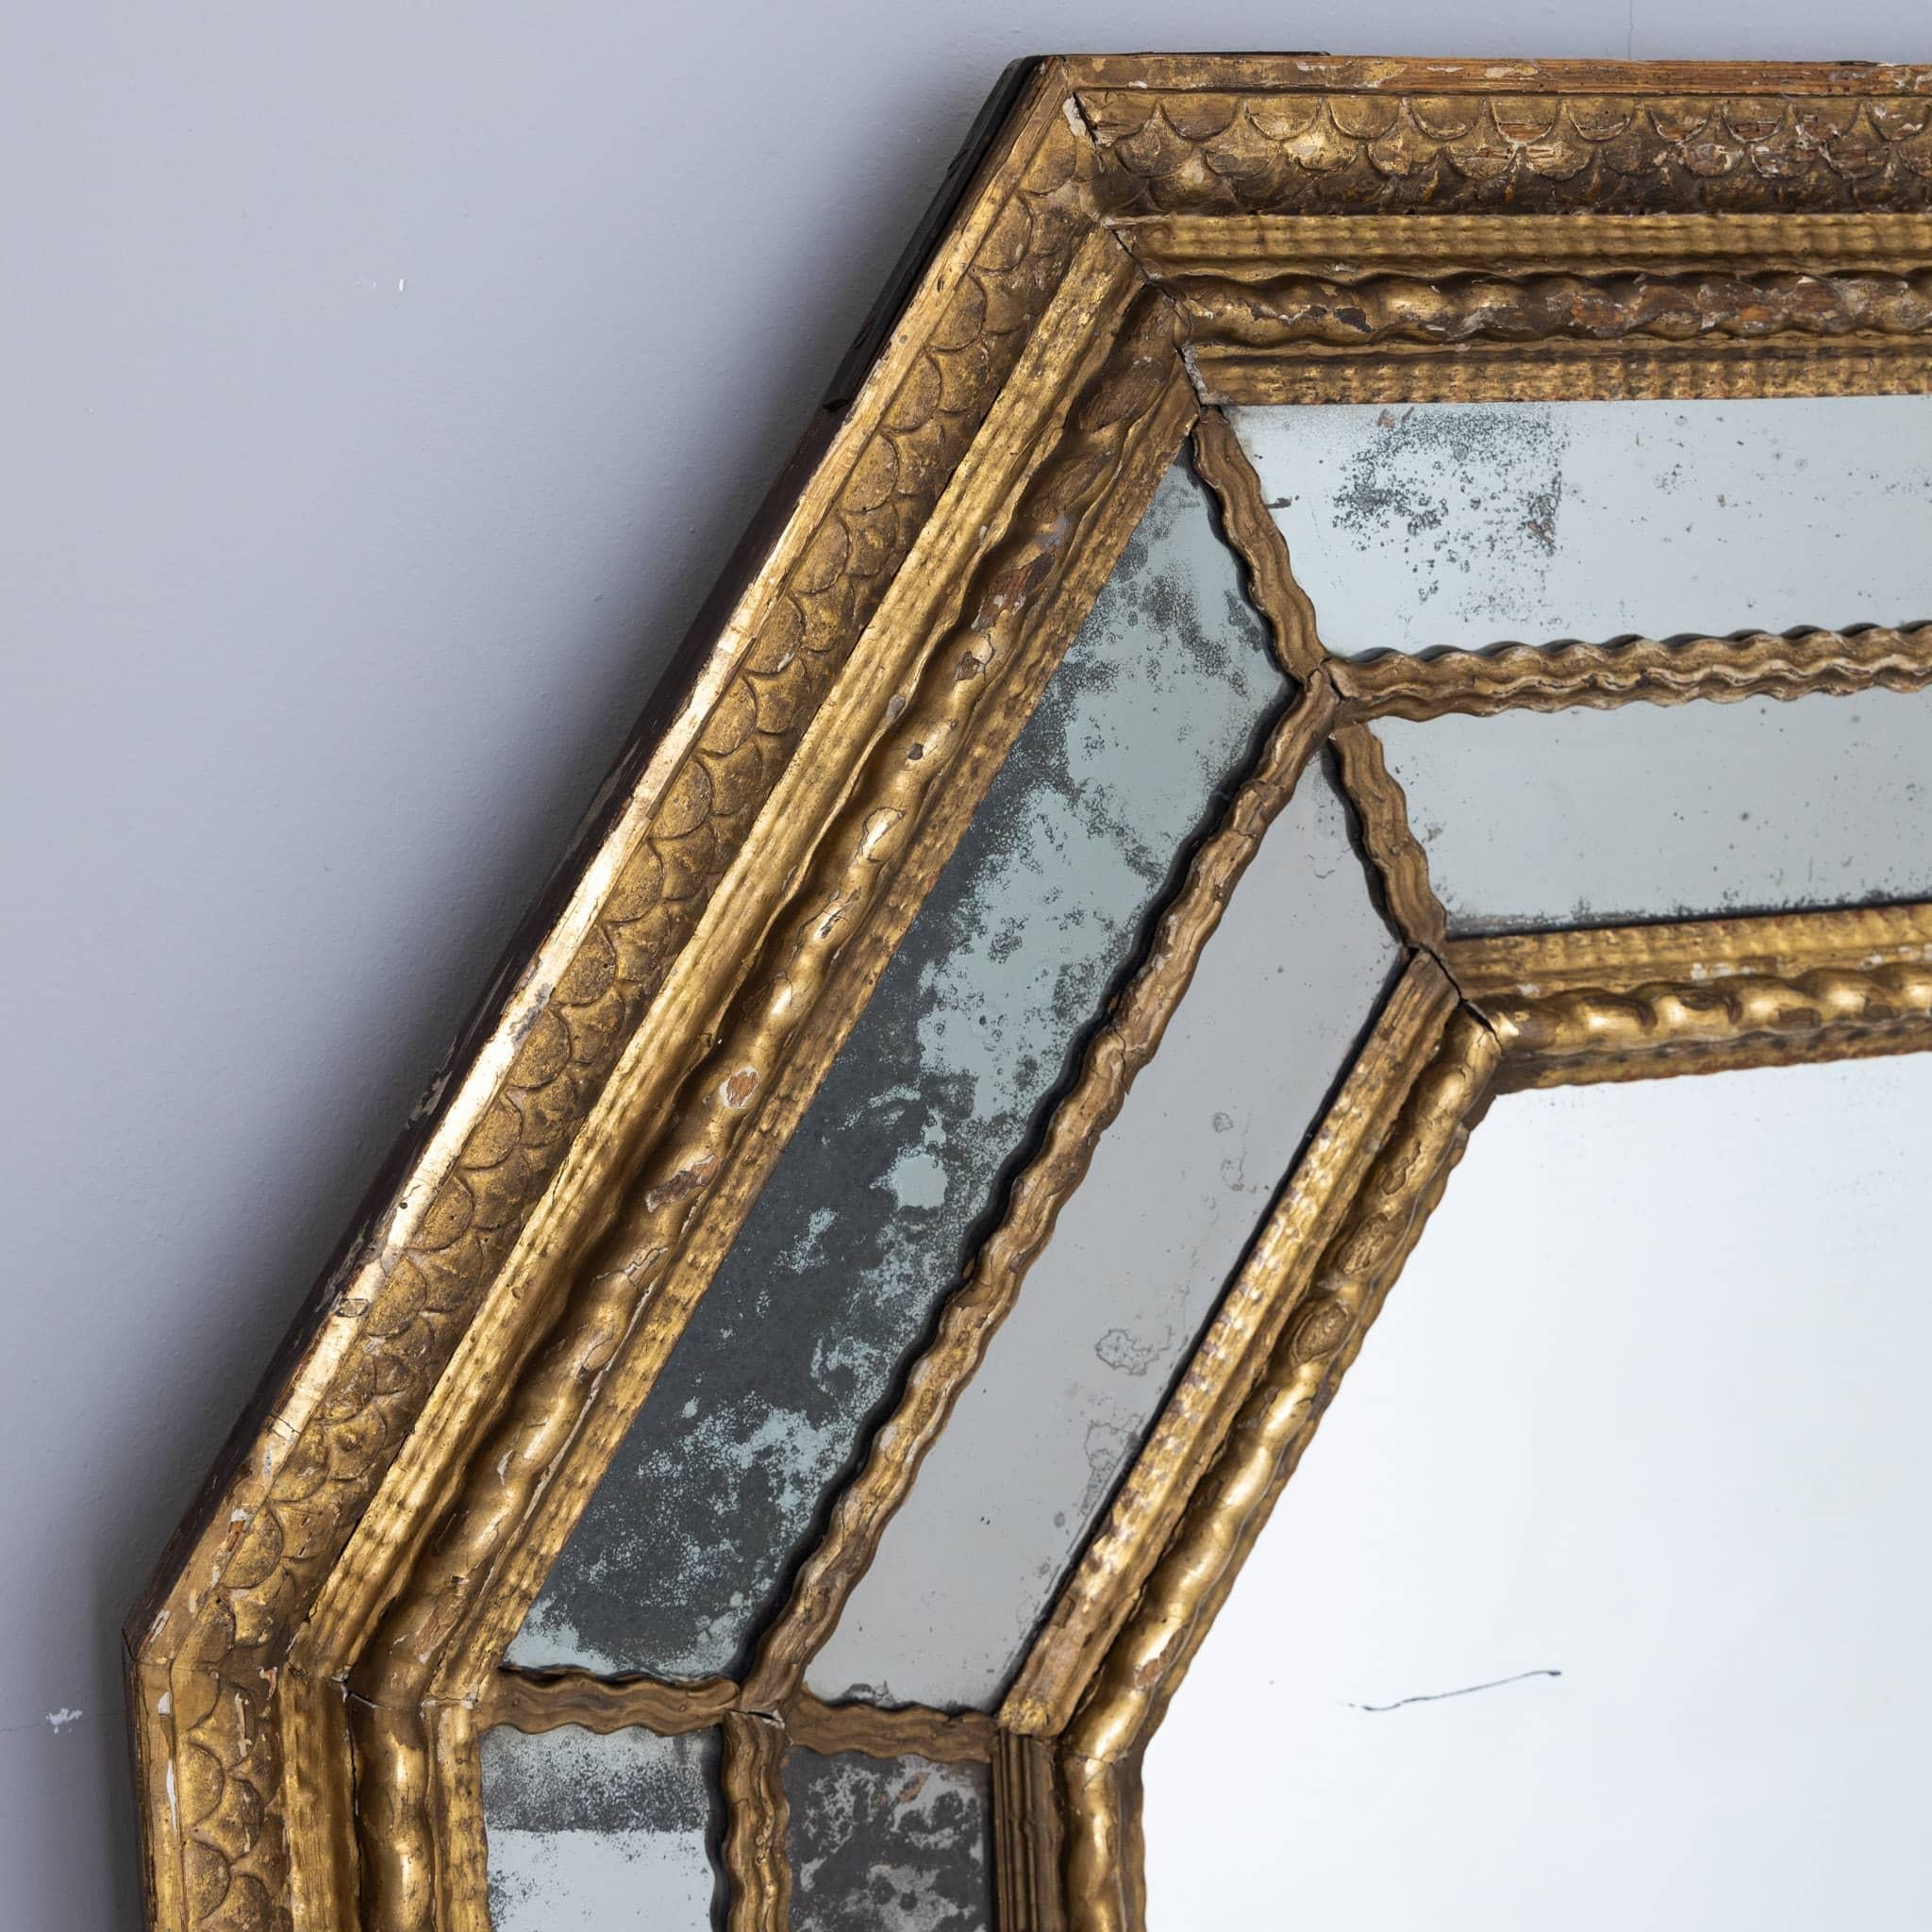 Large wall mirror with gold patinated octagonal wooden frame and old mirror glass blinded in places.